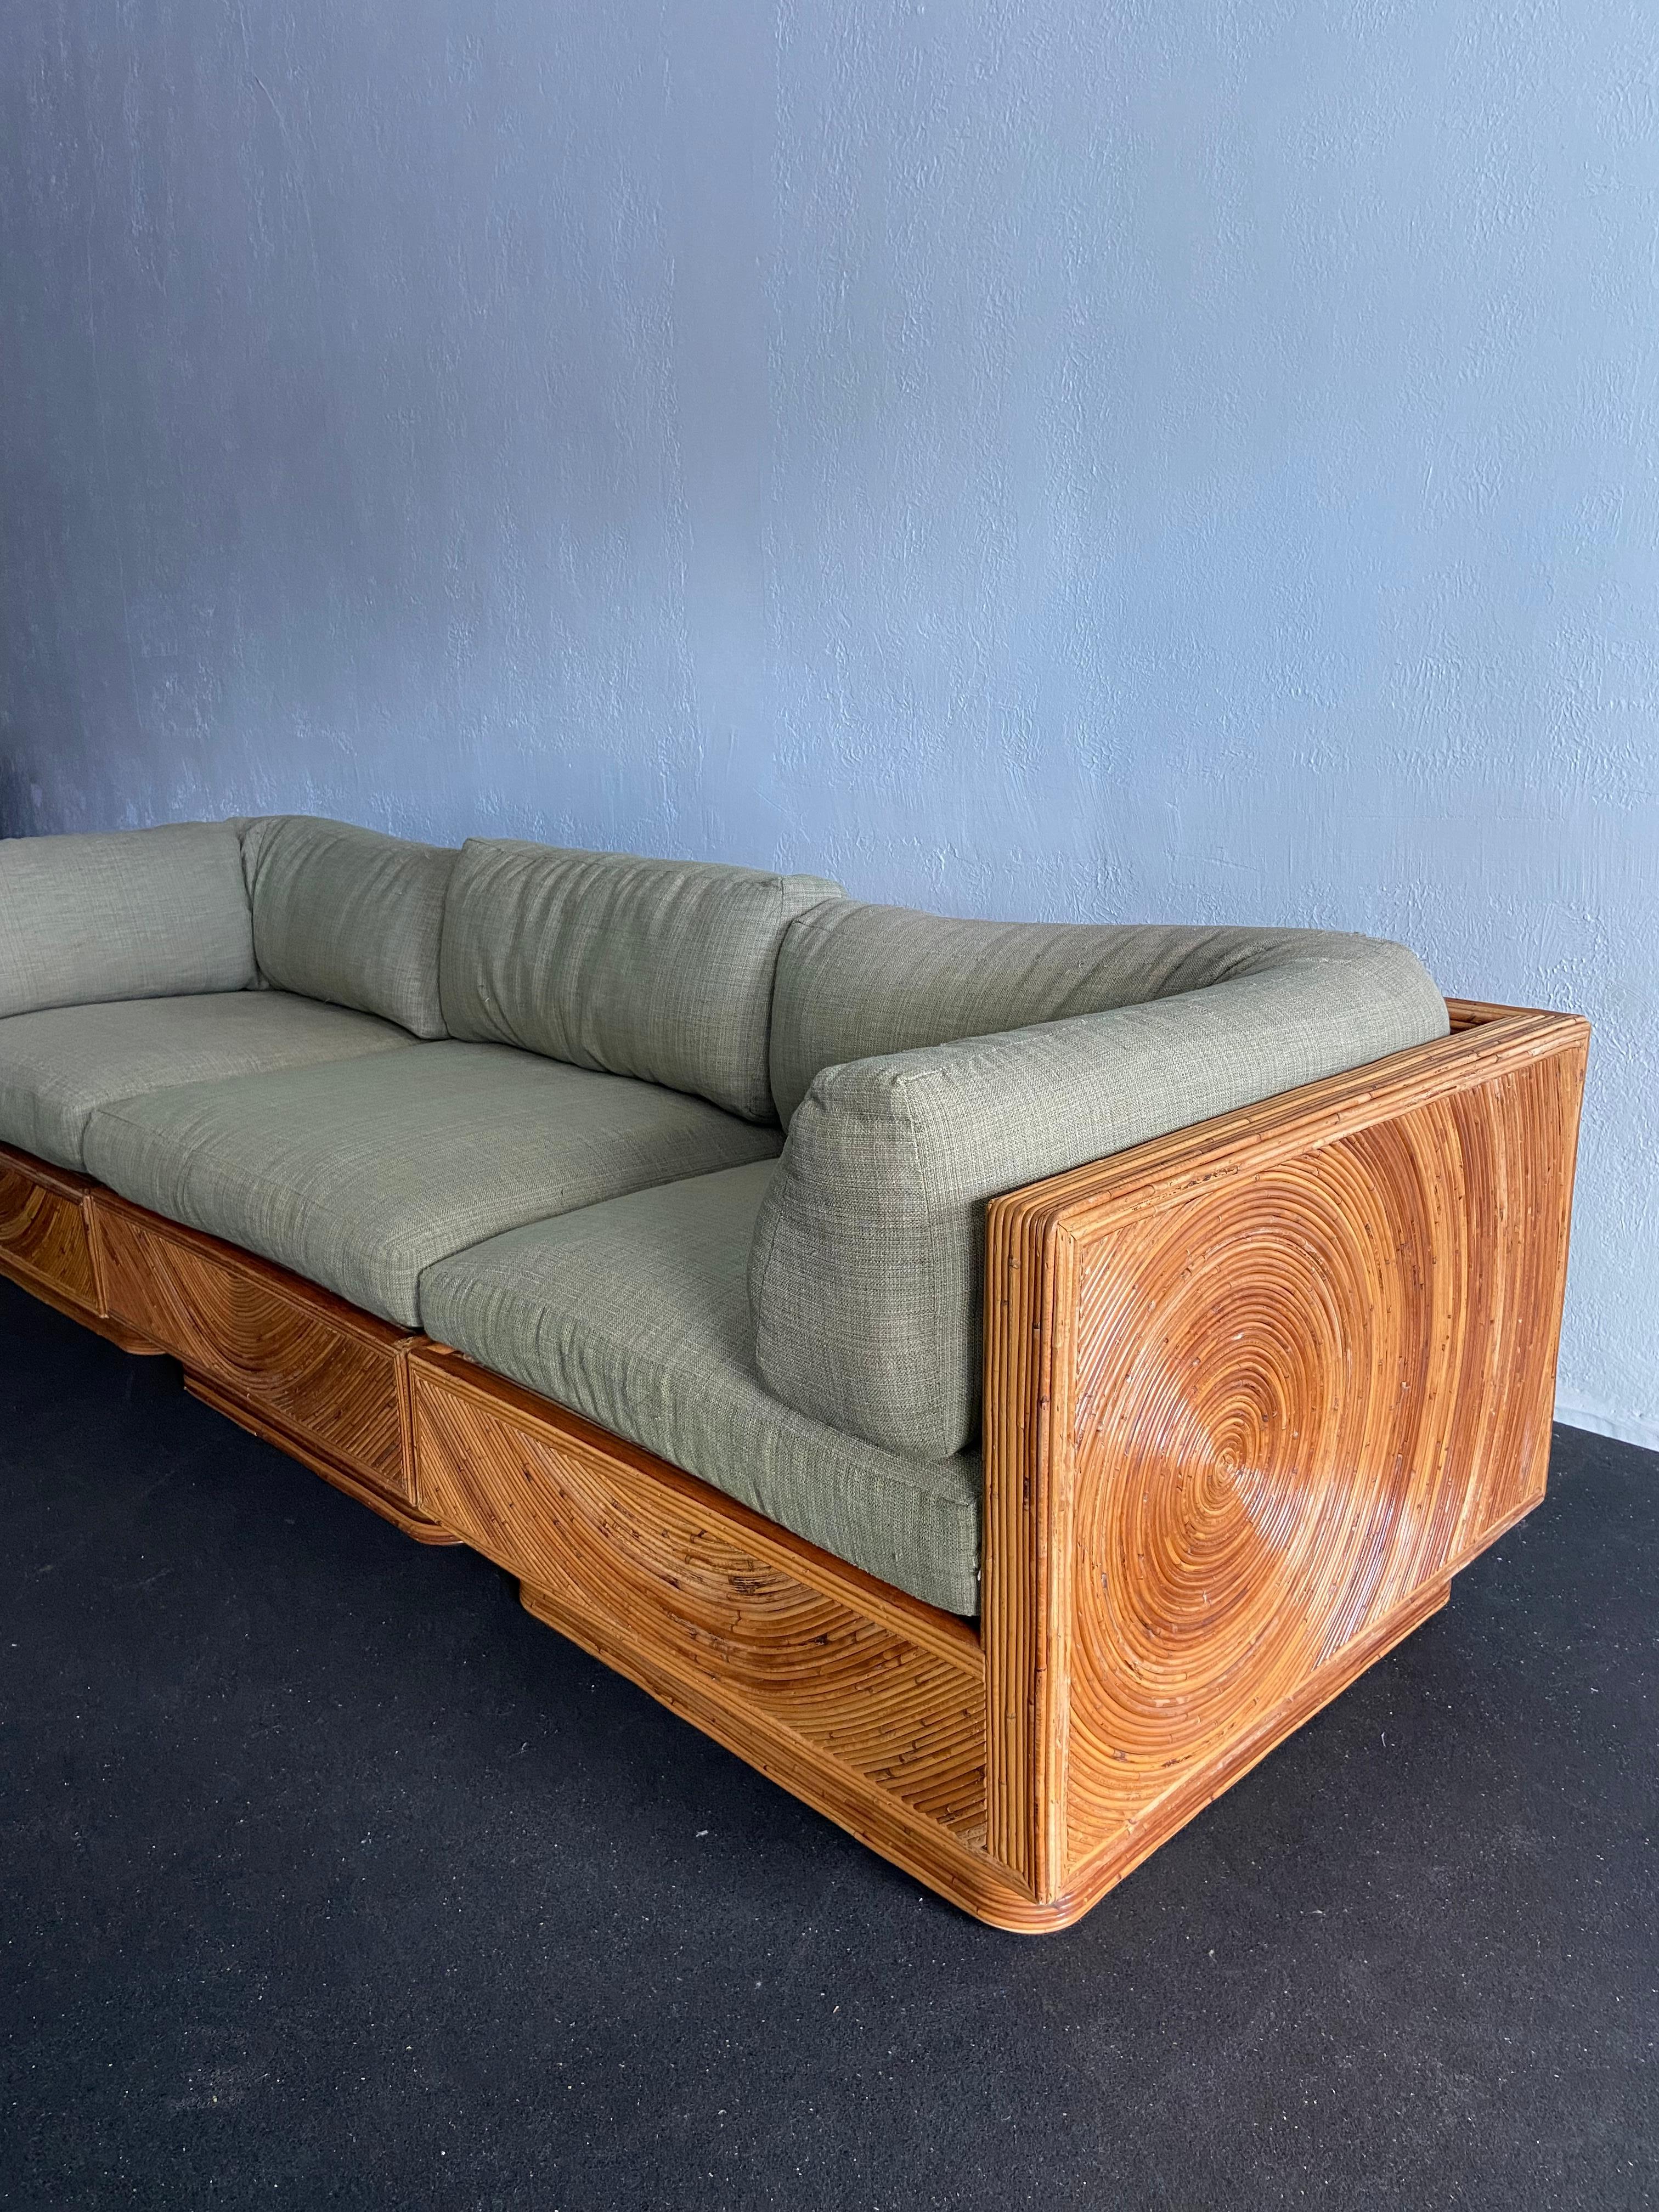 Vintage modular pencil reed sofa by Adrian Pearsall for Comfort Designs. Signed. Cushions were updated at some point as the base upholstery remains original, however both show signs of wear and reupholstery is highly recommended. 

Would work well